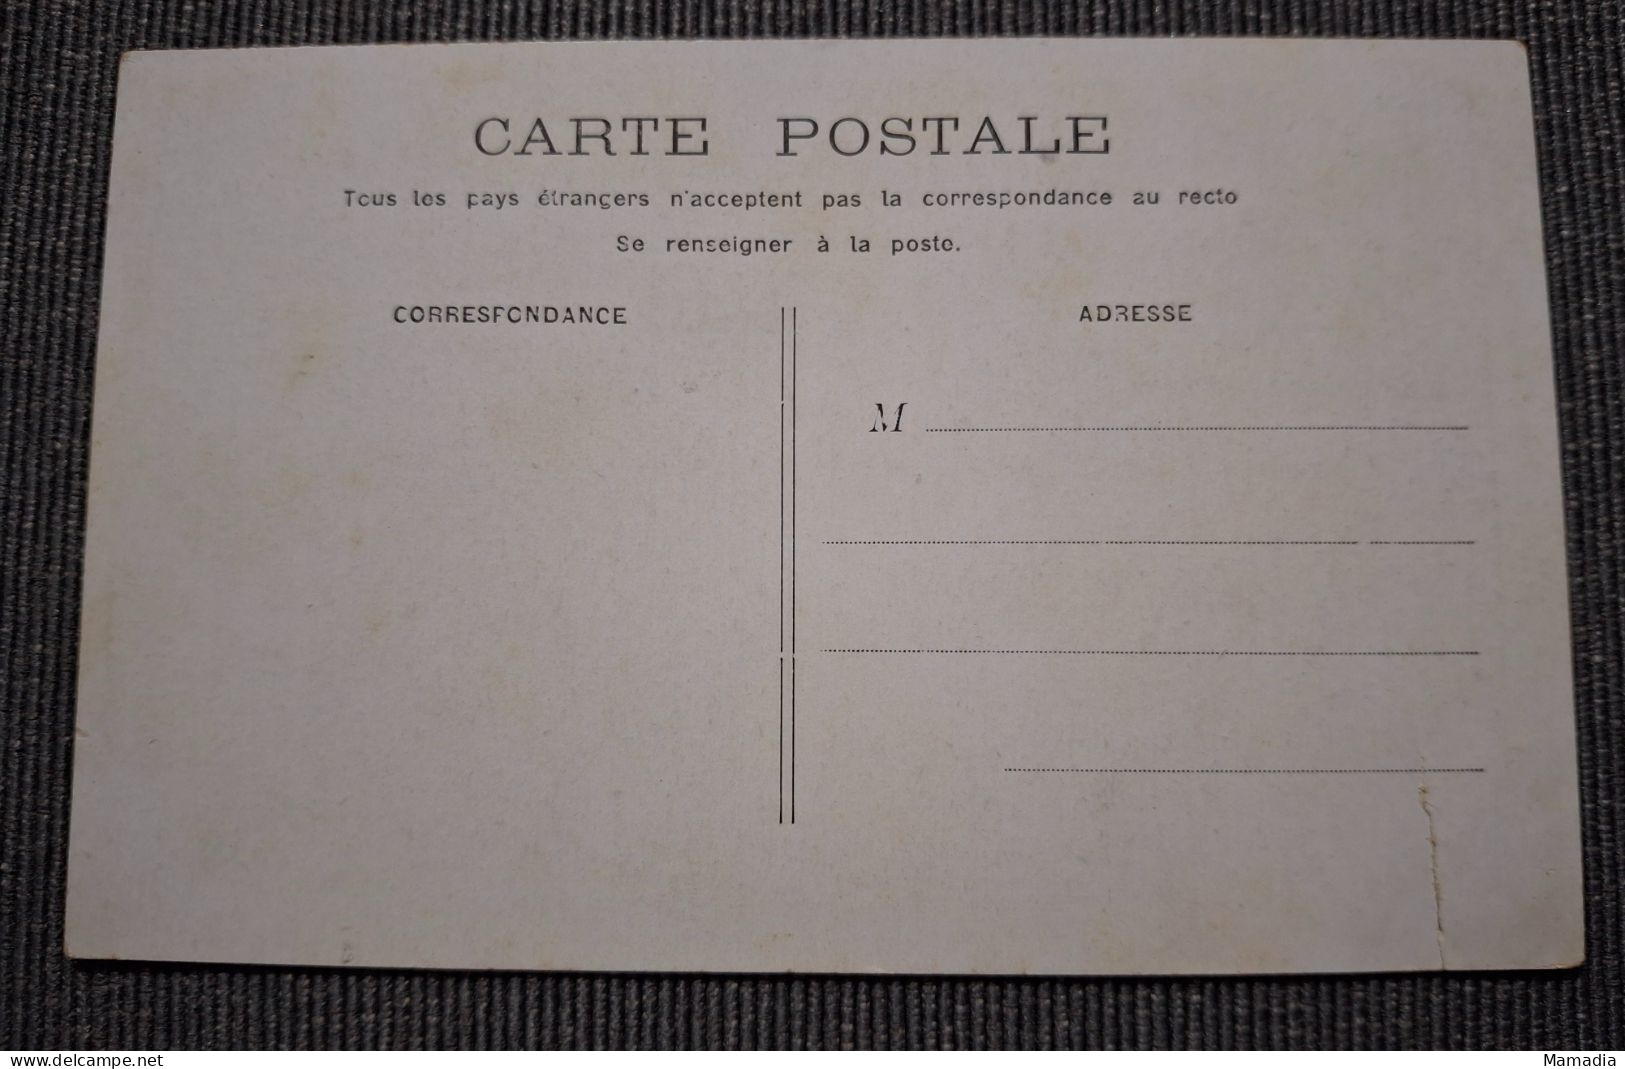 CARTE POSTALE ANCIENNE CYCLE VELO SERIE "MADEMOISELLE ECOUTEZ-MOI DONC" N°1 / 6 - Koppels